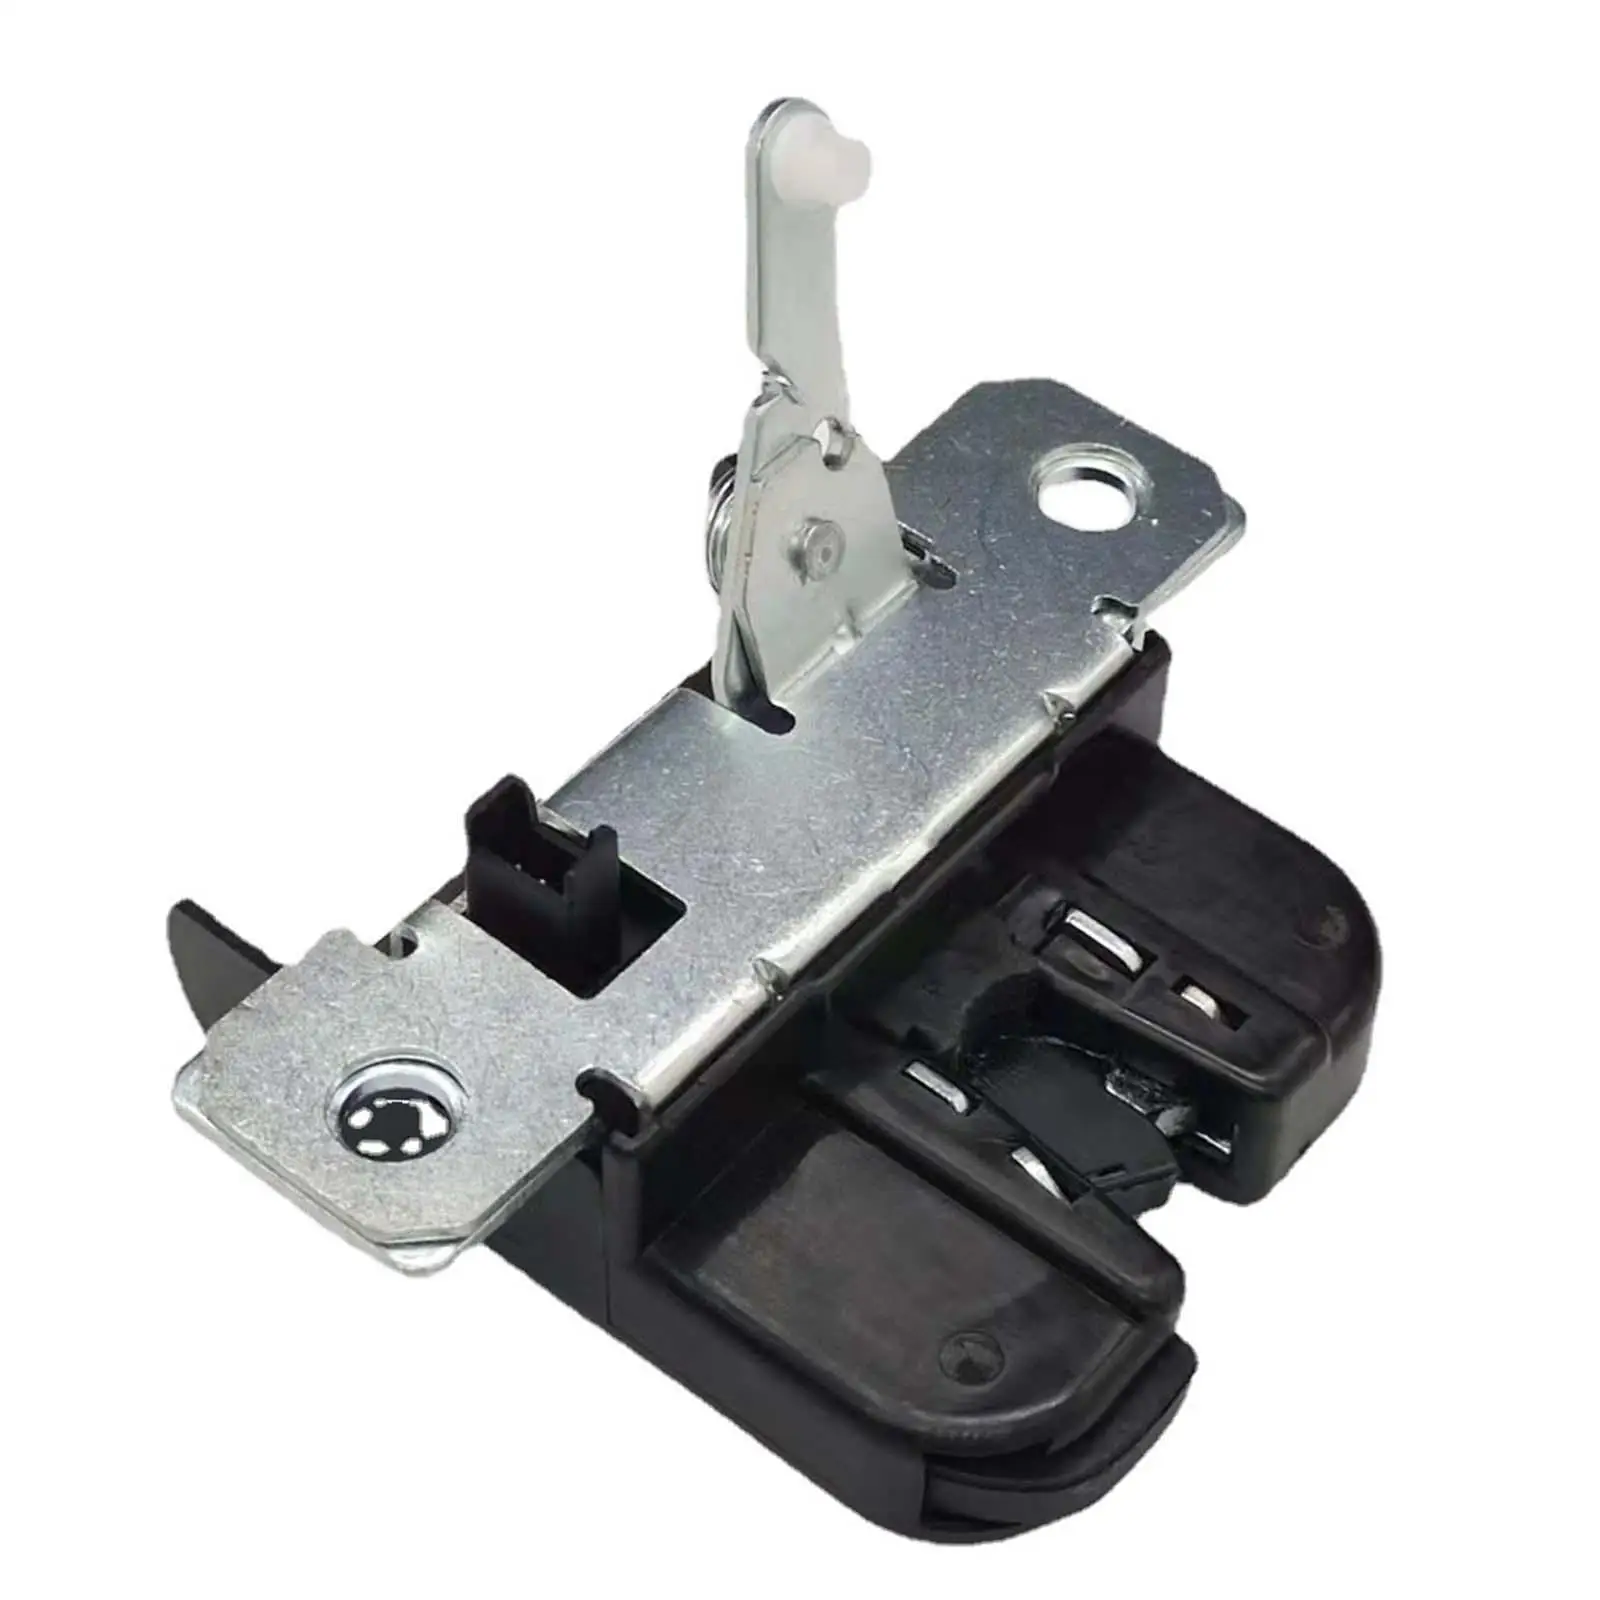 Rear Tailgate Boot Lock 1J6827505 Replaces 1J6827505B for VW Golf Sturdy Easily Install Automobile Repairing Accessory